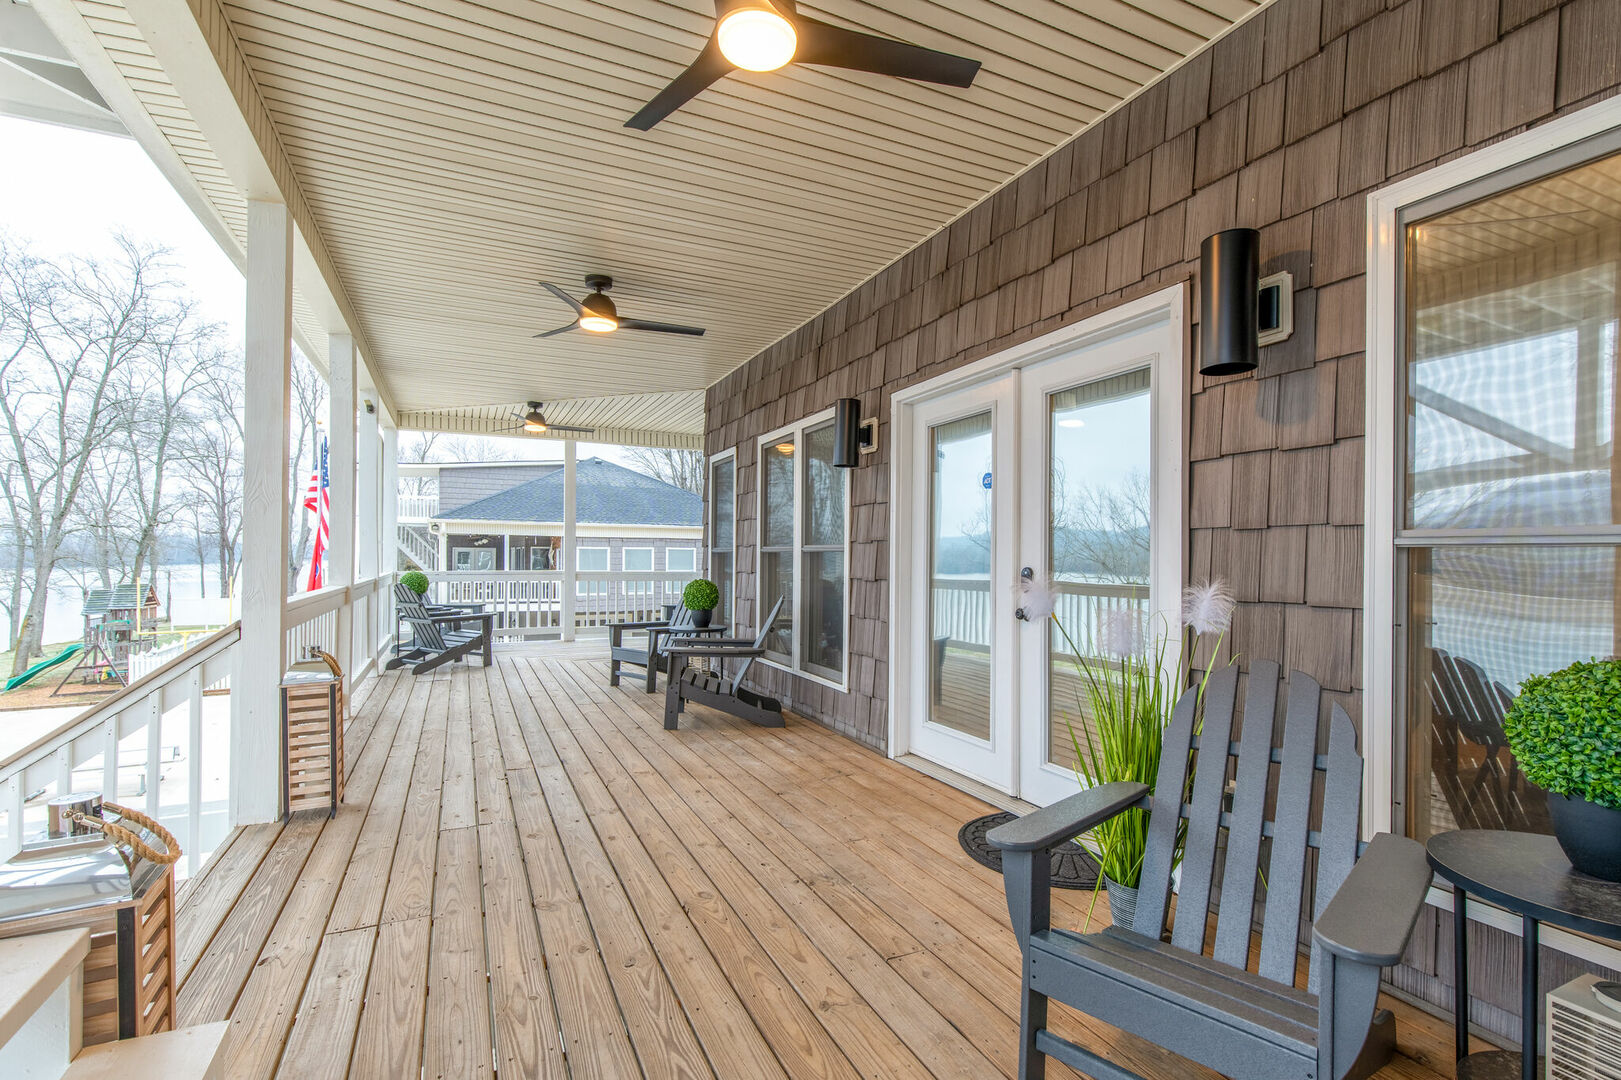 Multiple decks with breathtaking views of the river. Features multiple seating areas and ceiling fans.